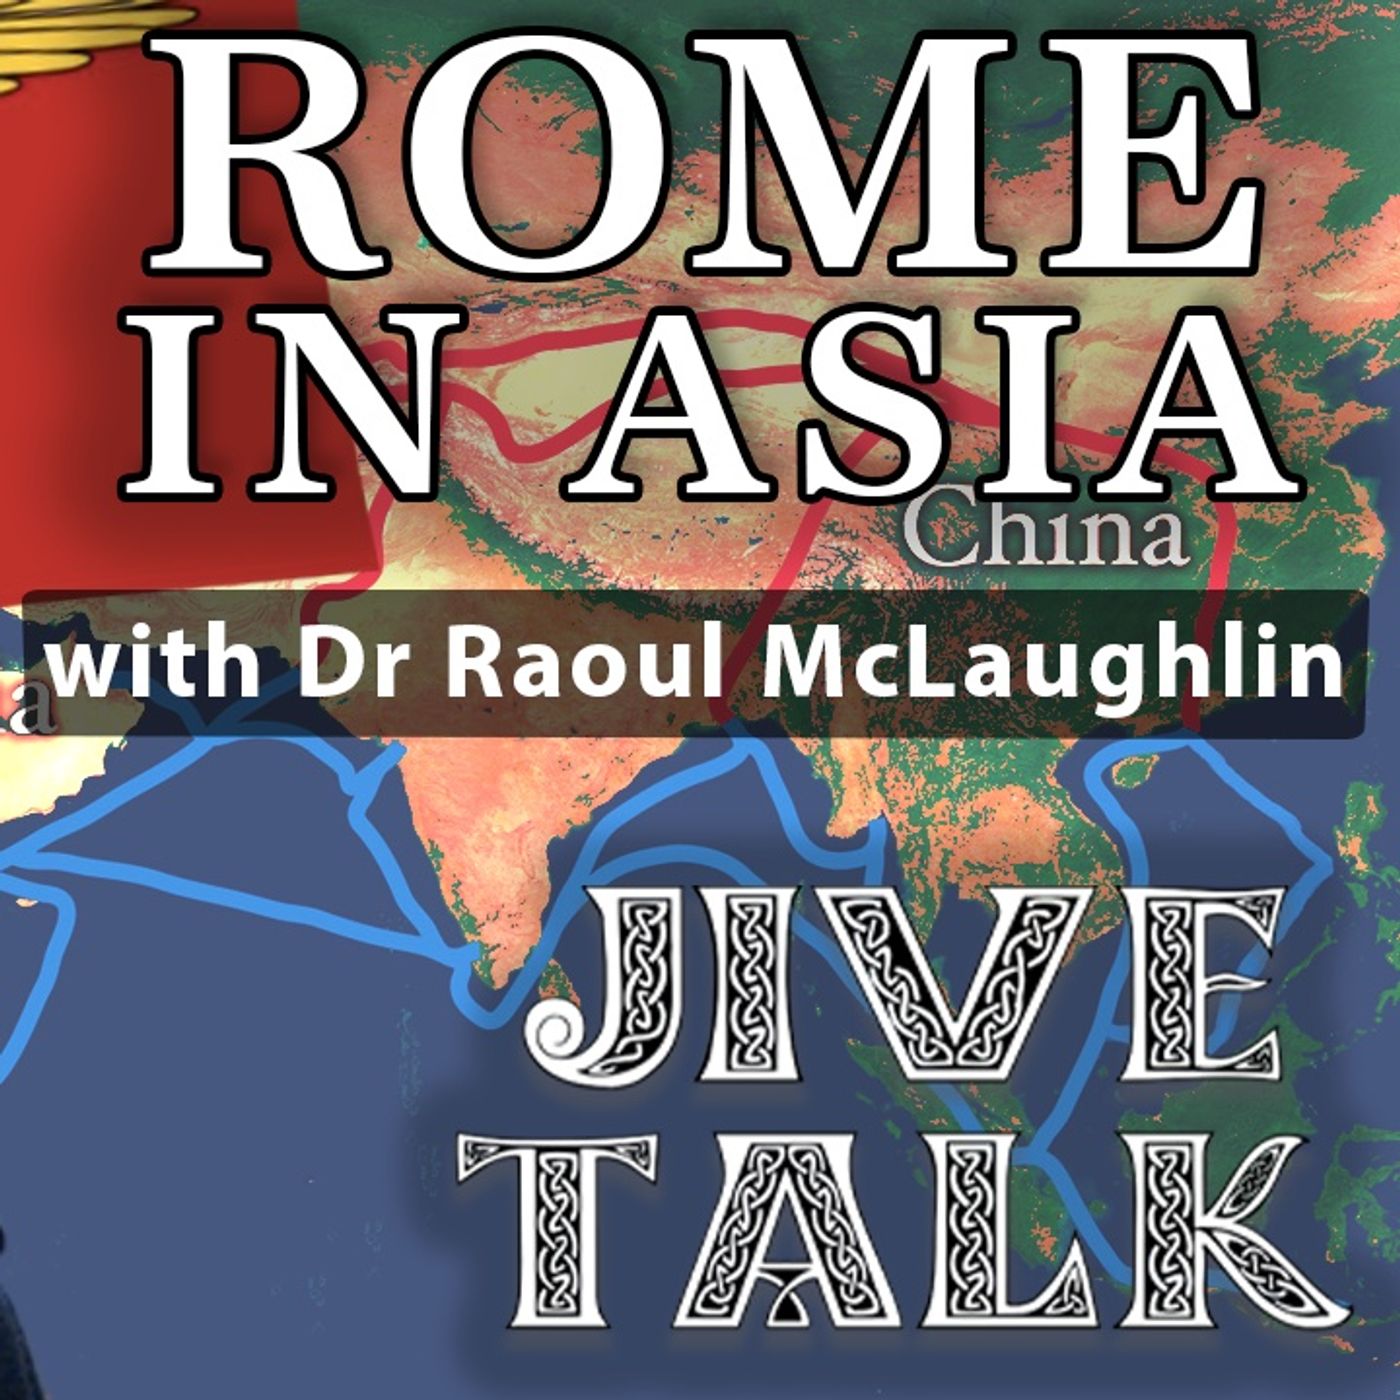 Rome's economic links with Asia with Dr Raoul Mclaughlin